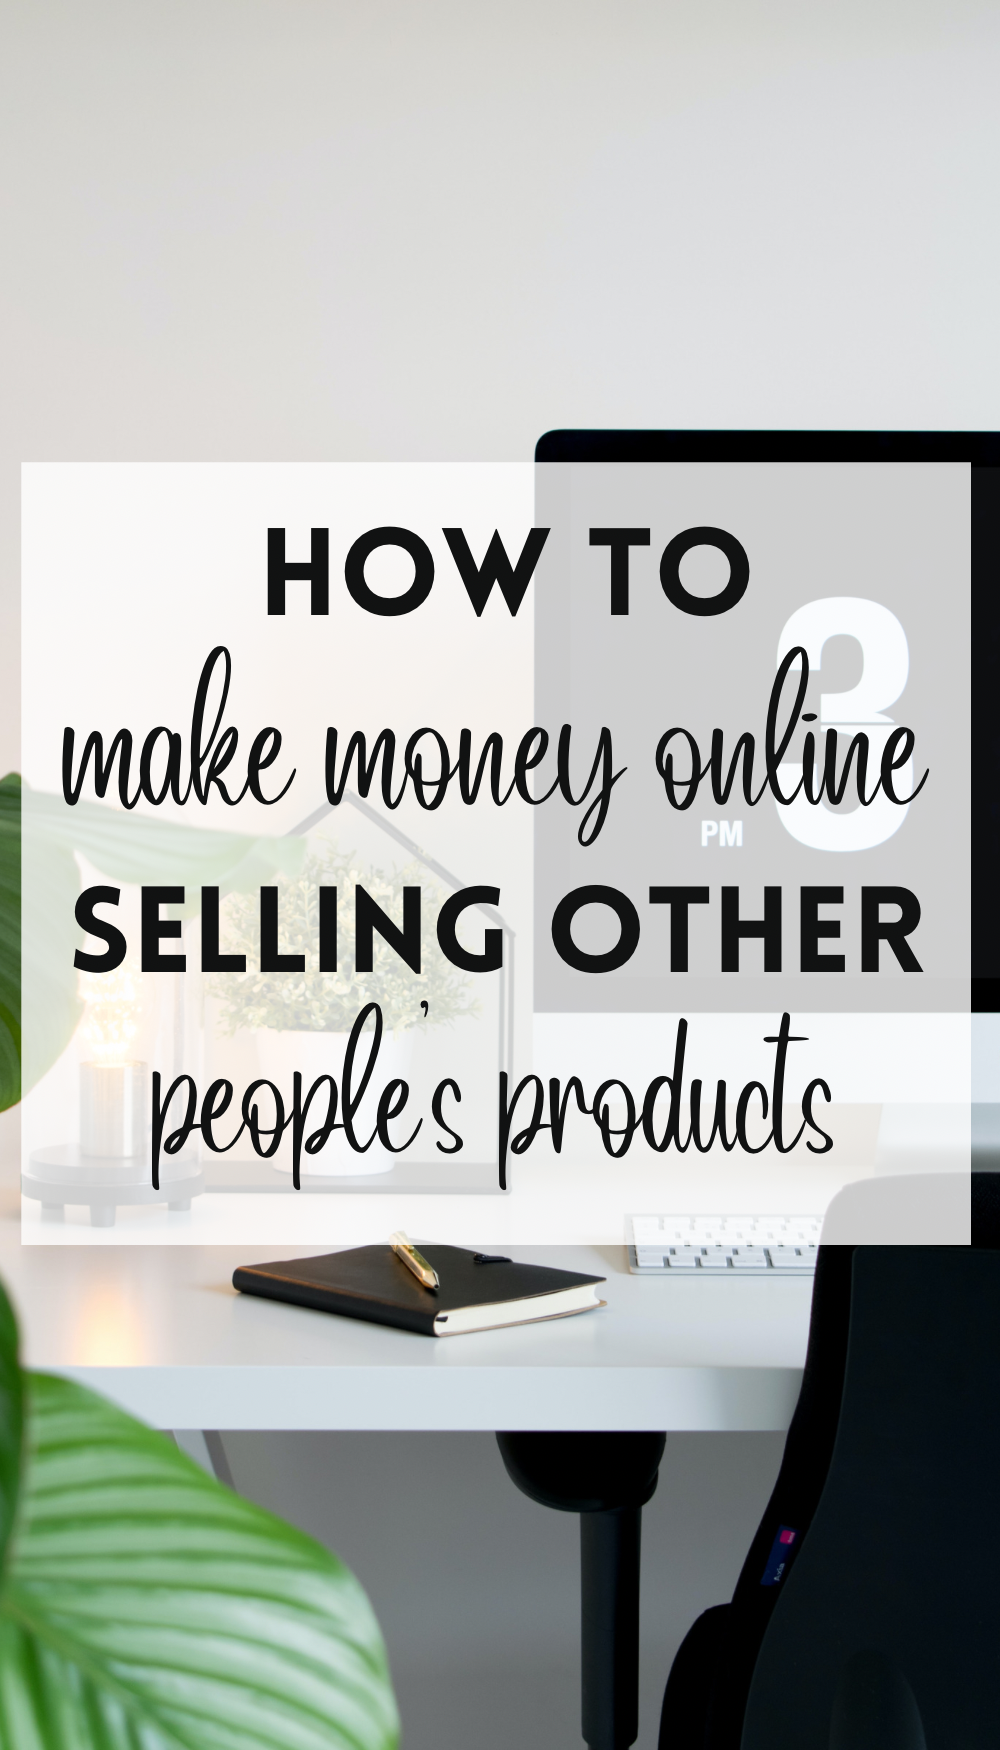 How to make money online selling other people's products